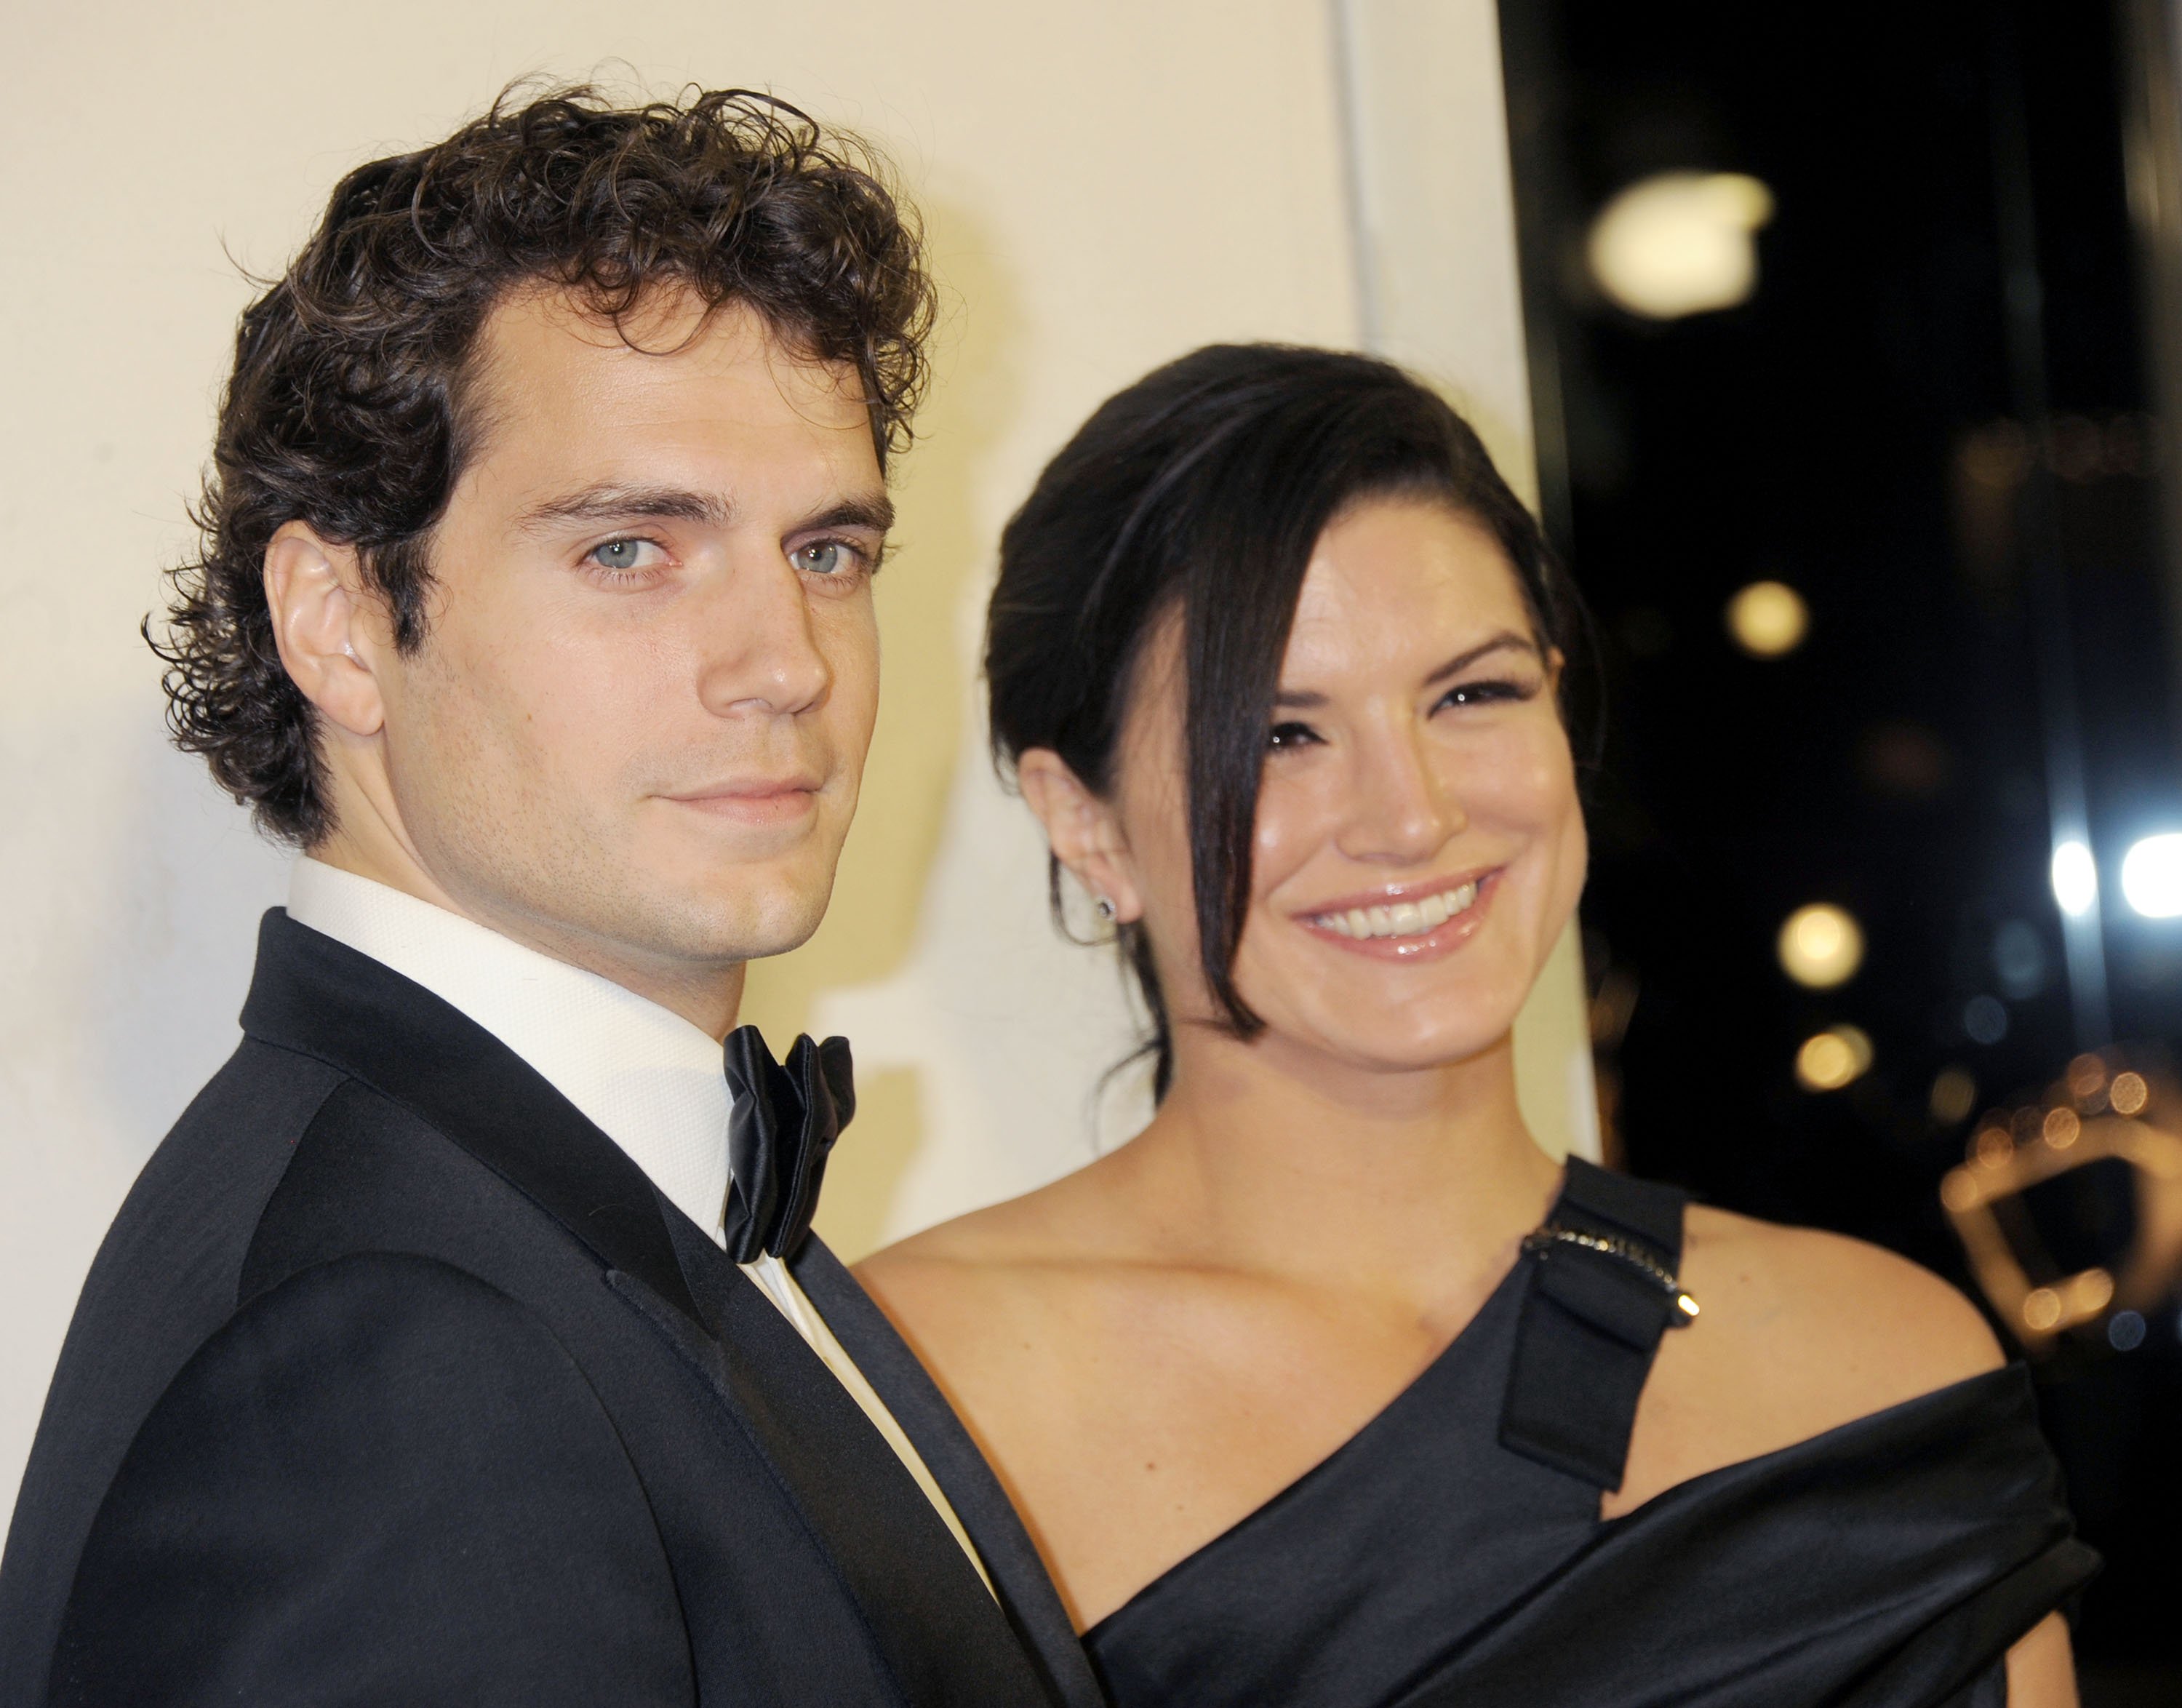 Henry Cavill and Gina Carano at a cocktail party for Project Angel Food at TOM FORD in Beverly Hills, California, on February 21, 2013. | Source: Getty Images